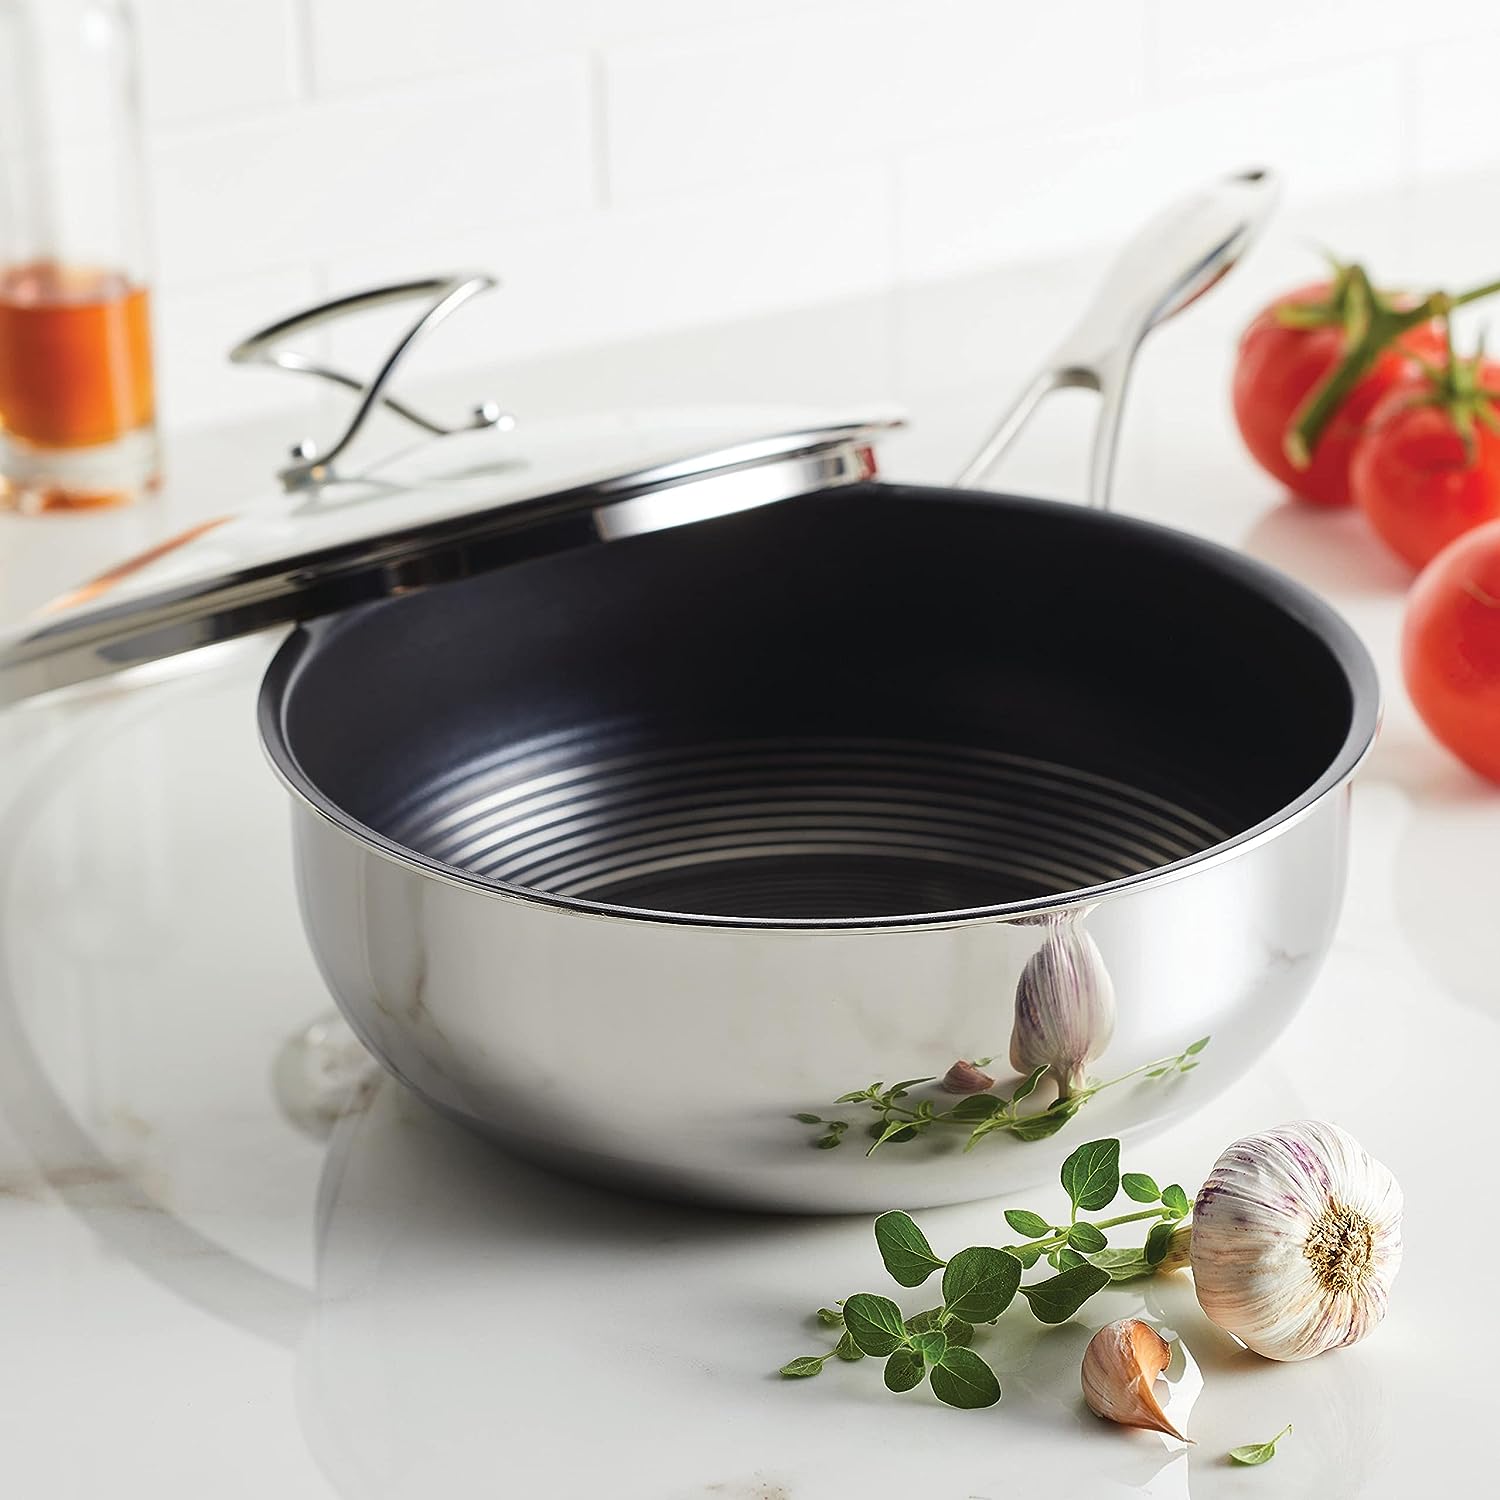 https://bigbigmart.com/wp-content/uploads/2023/09/Circulon-Clad-Stainless-Steel-Chef-Pan-and-Utensil-Set-with-Hybrid-SteelShield-and-Nonstick-Technology10.jpg